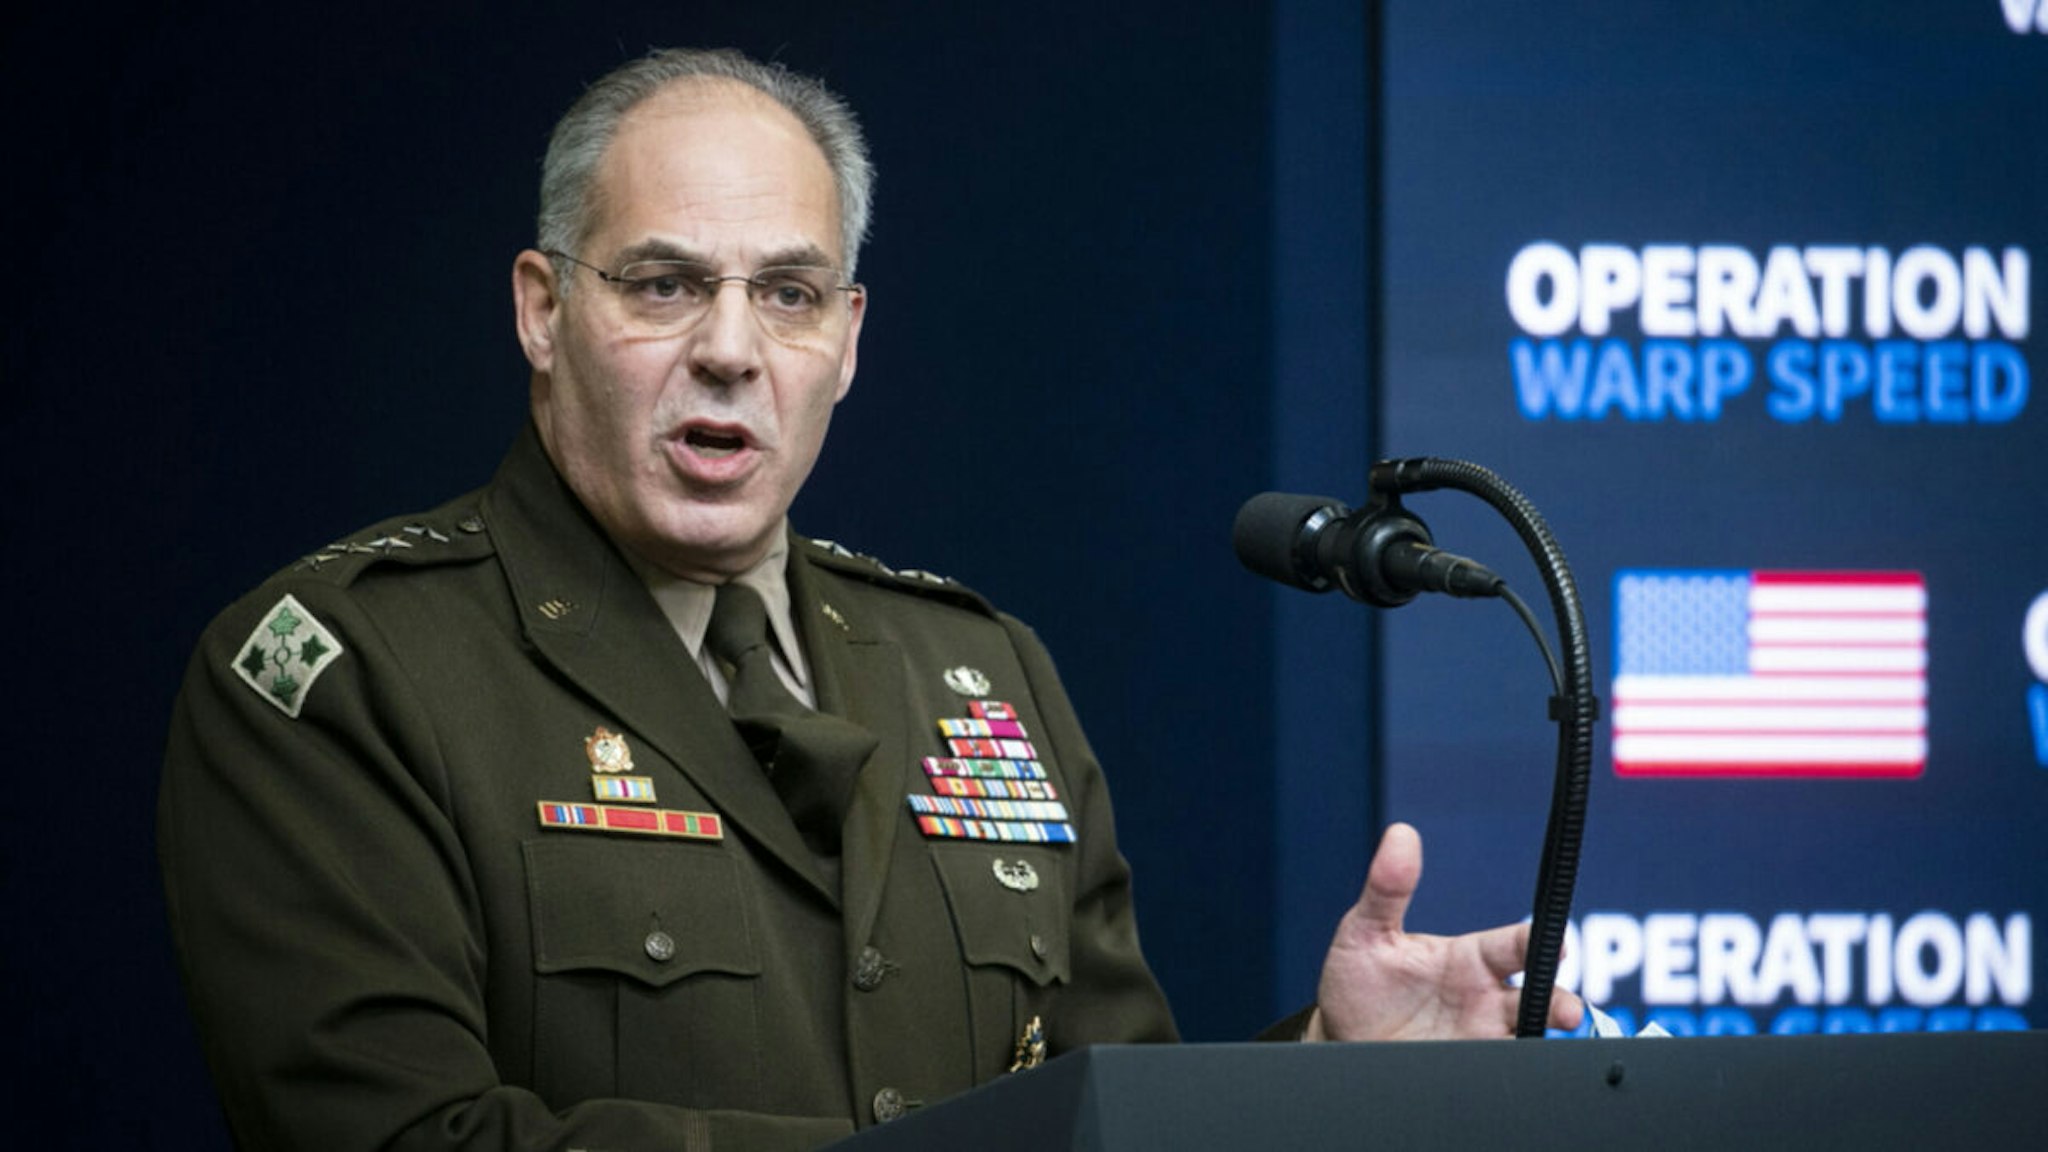 General Gustave Perna, chief operating officer for the Defense Department's Project Warp Speed, speaks during an Operation Warp Speed vaccine summit at the White House in Washington, D.C., U.S., on Tuesday, Dec. 8, 2020.